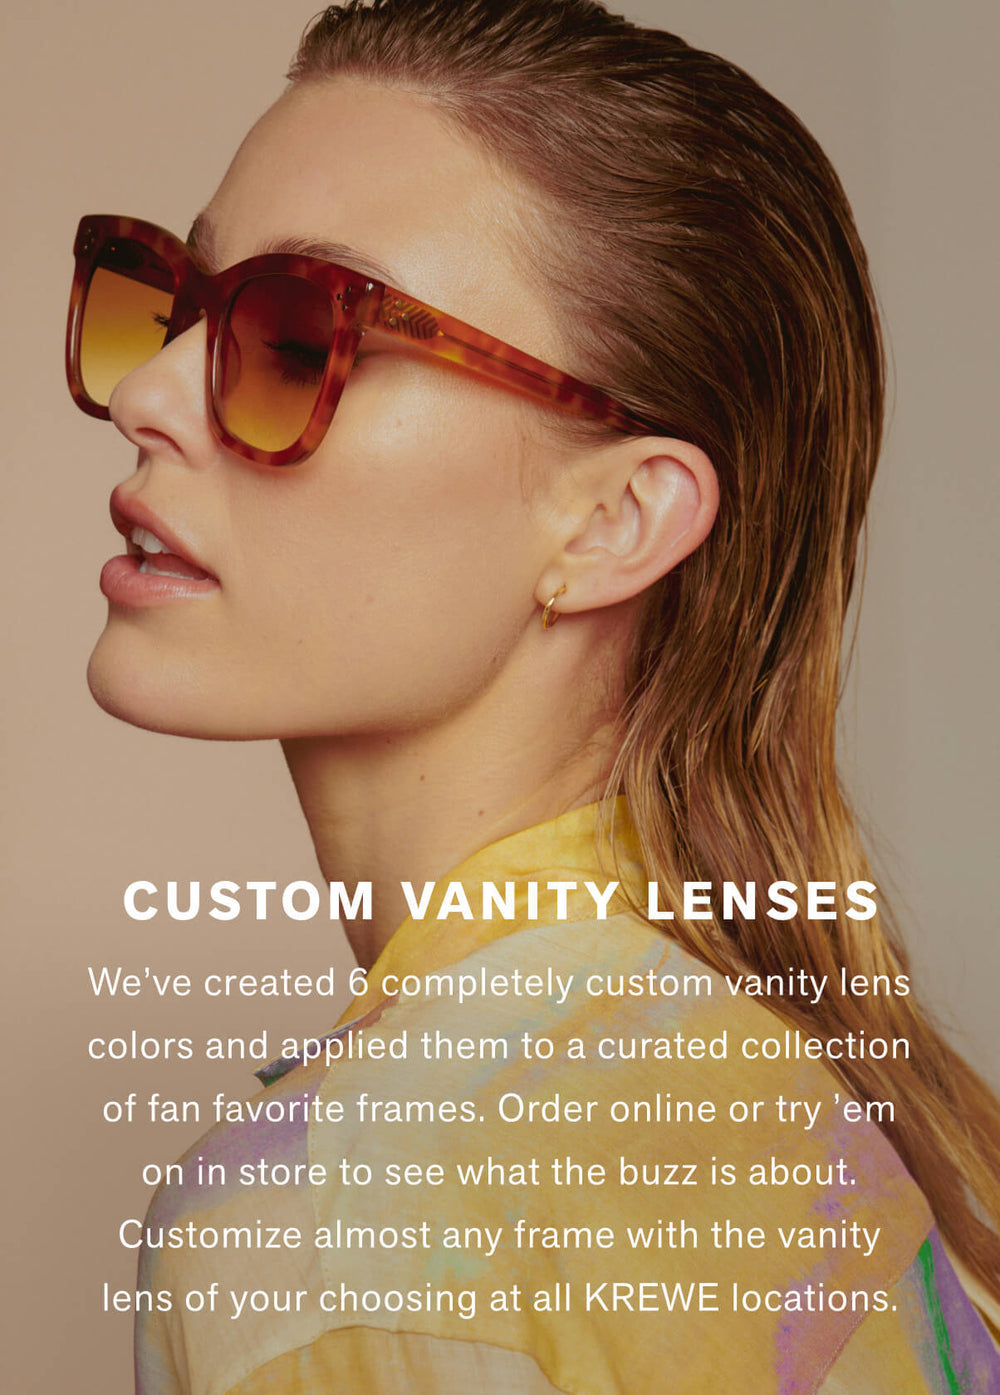 We’ve created 6 completely custom vanity lens colors and applied them to a curated collection of fan favorite frames. Order online or try ’em on in store to see what the buzz is about. Customize almost any frame with the vanity lens of your choosing at all KREWE locations.